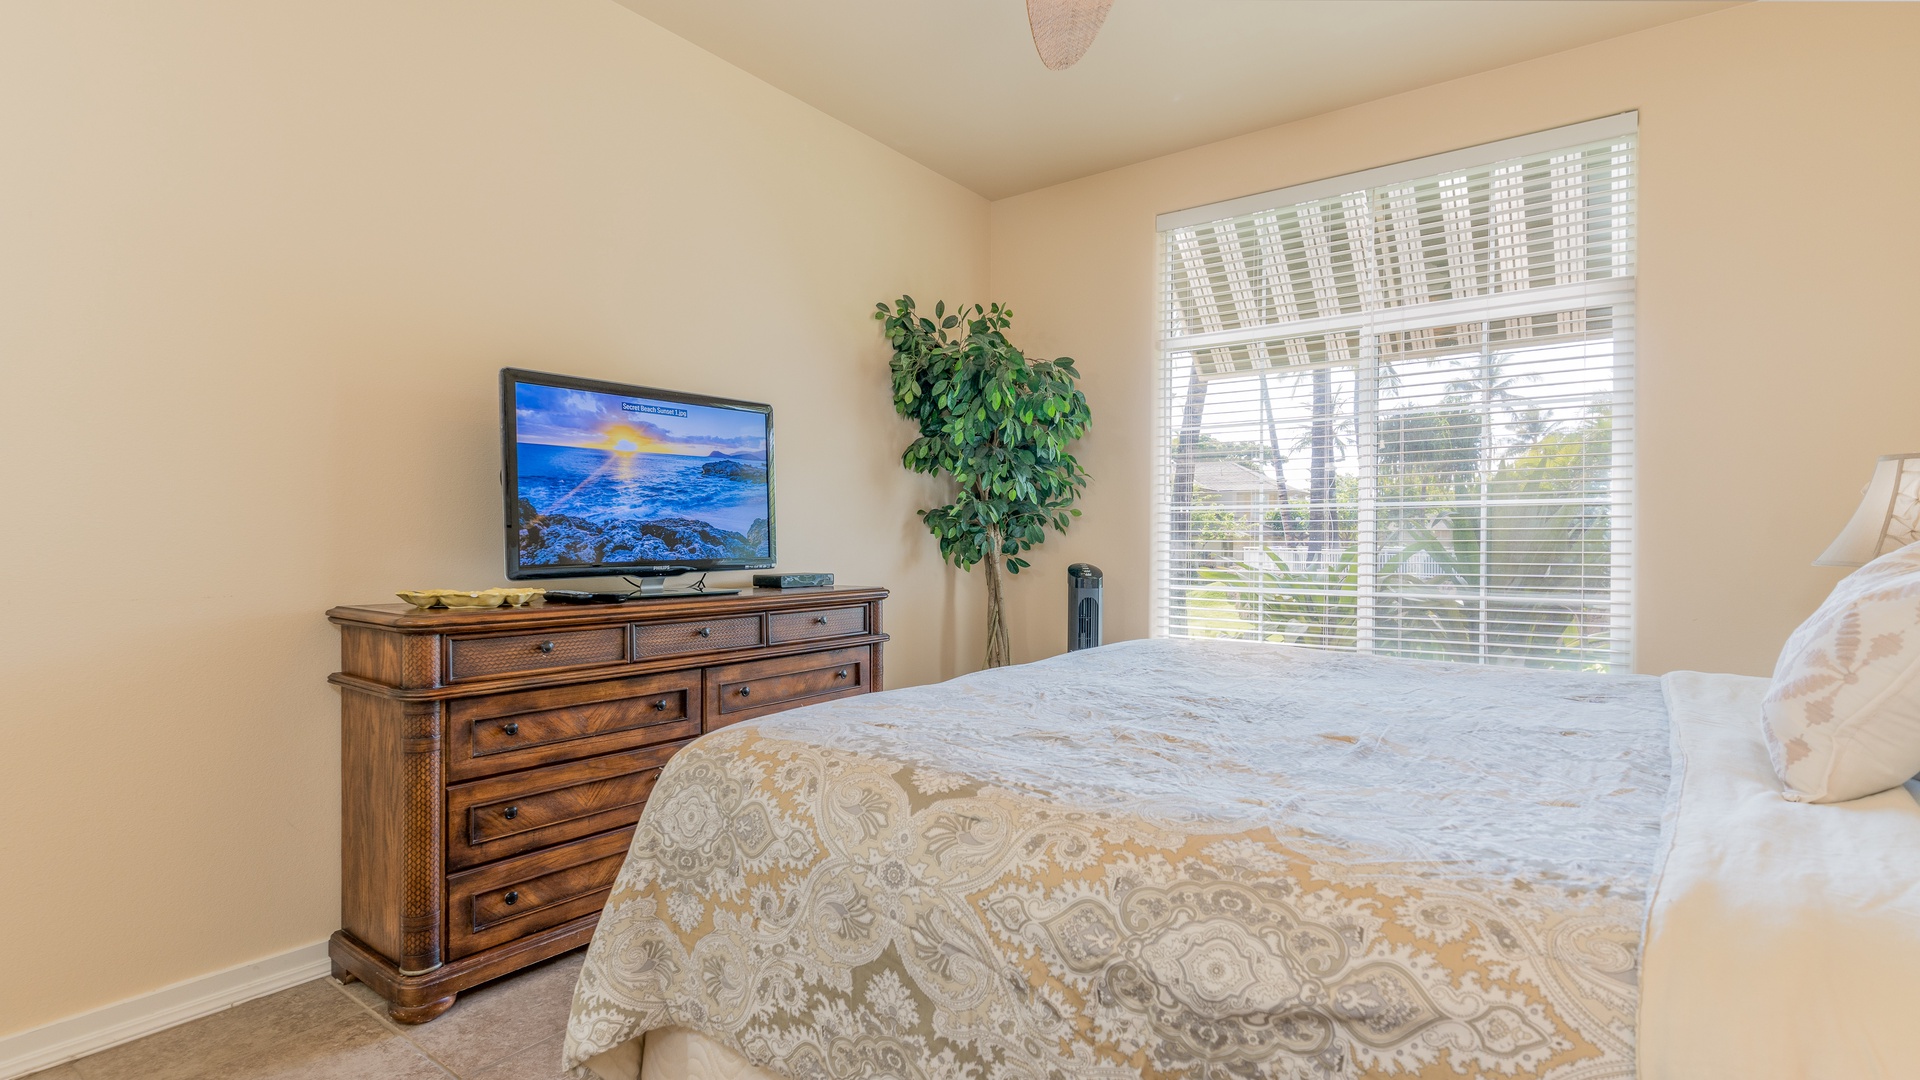 Kapolei Vacation Rentals, Kai Lani 8B - The primary guest bedroom includes a dresser and television.